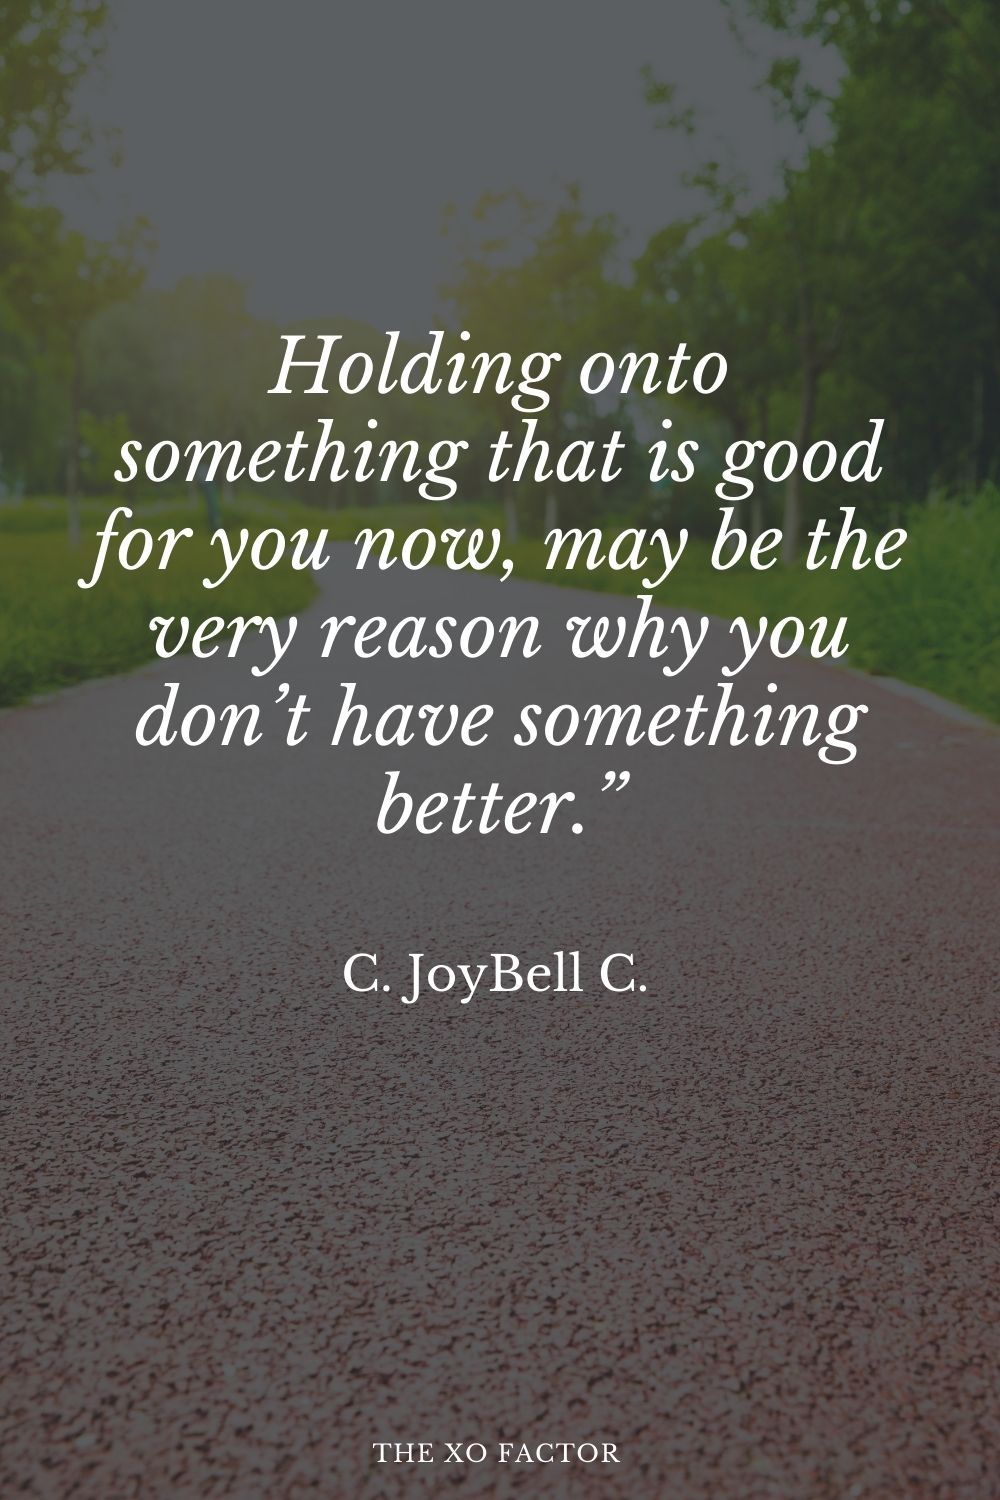 Holding onto something that is good for you now, may be the very reason why you don’t have something better.” C. JoyBell C.